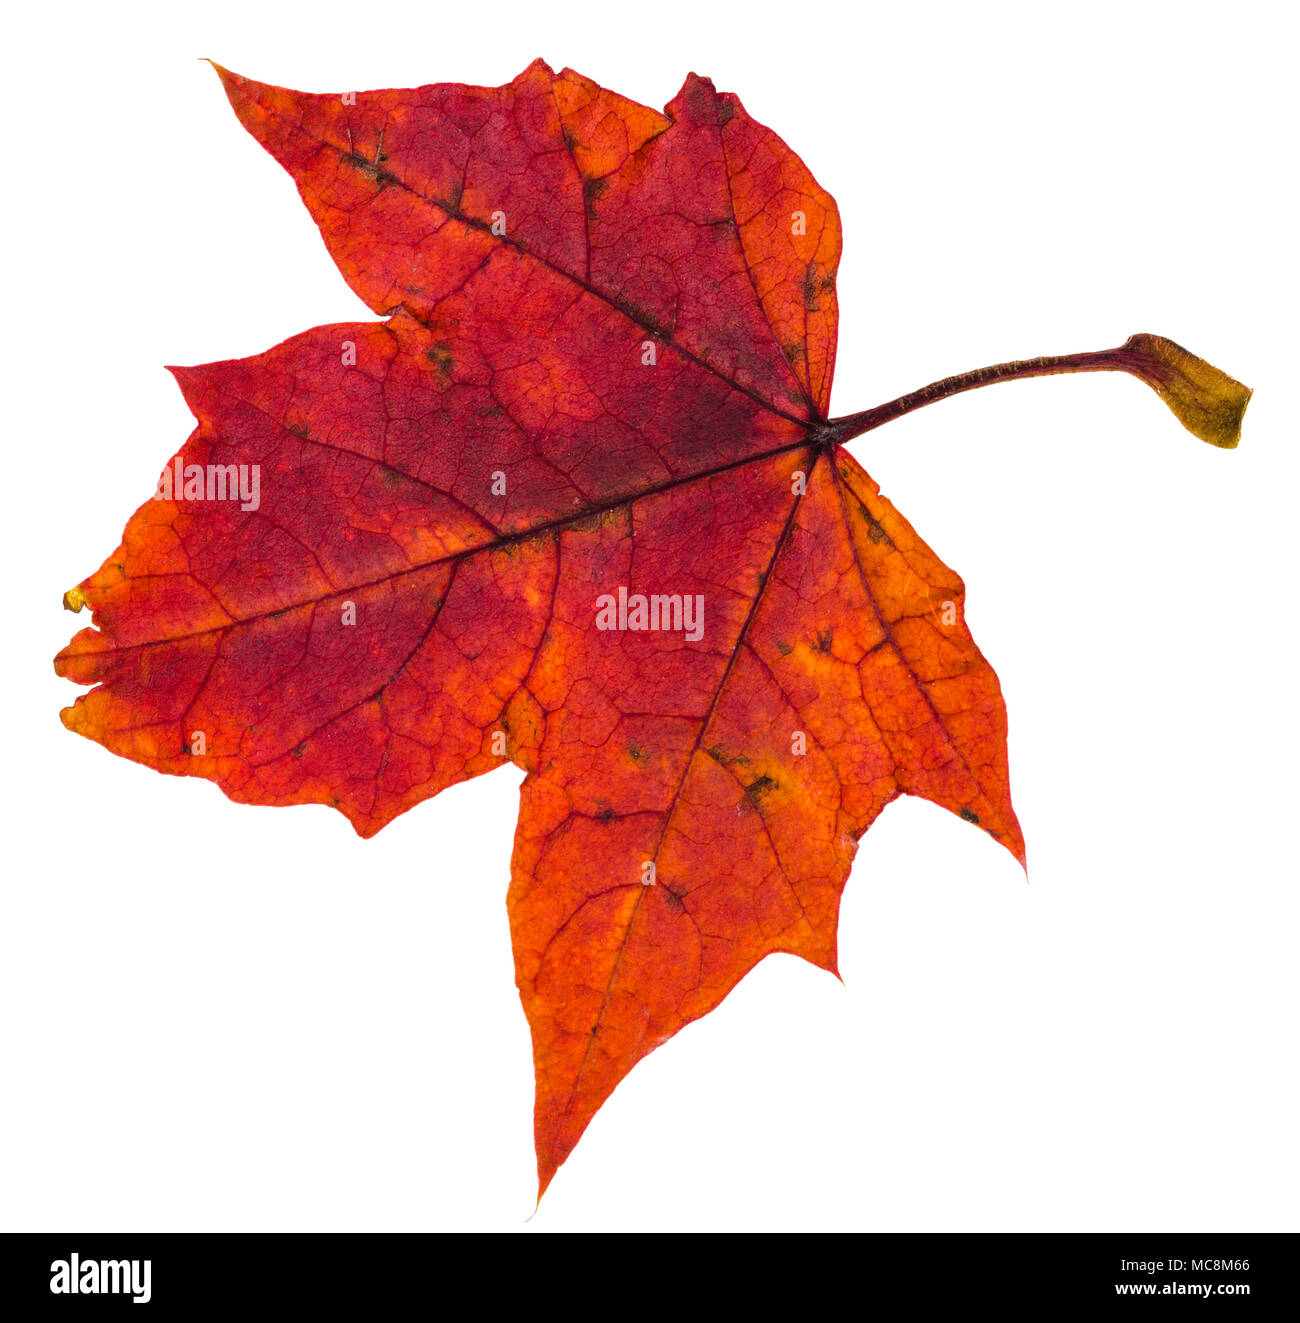 red autumn leaf of maple tree isolated on white background Stock Photo